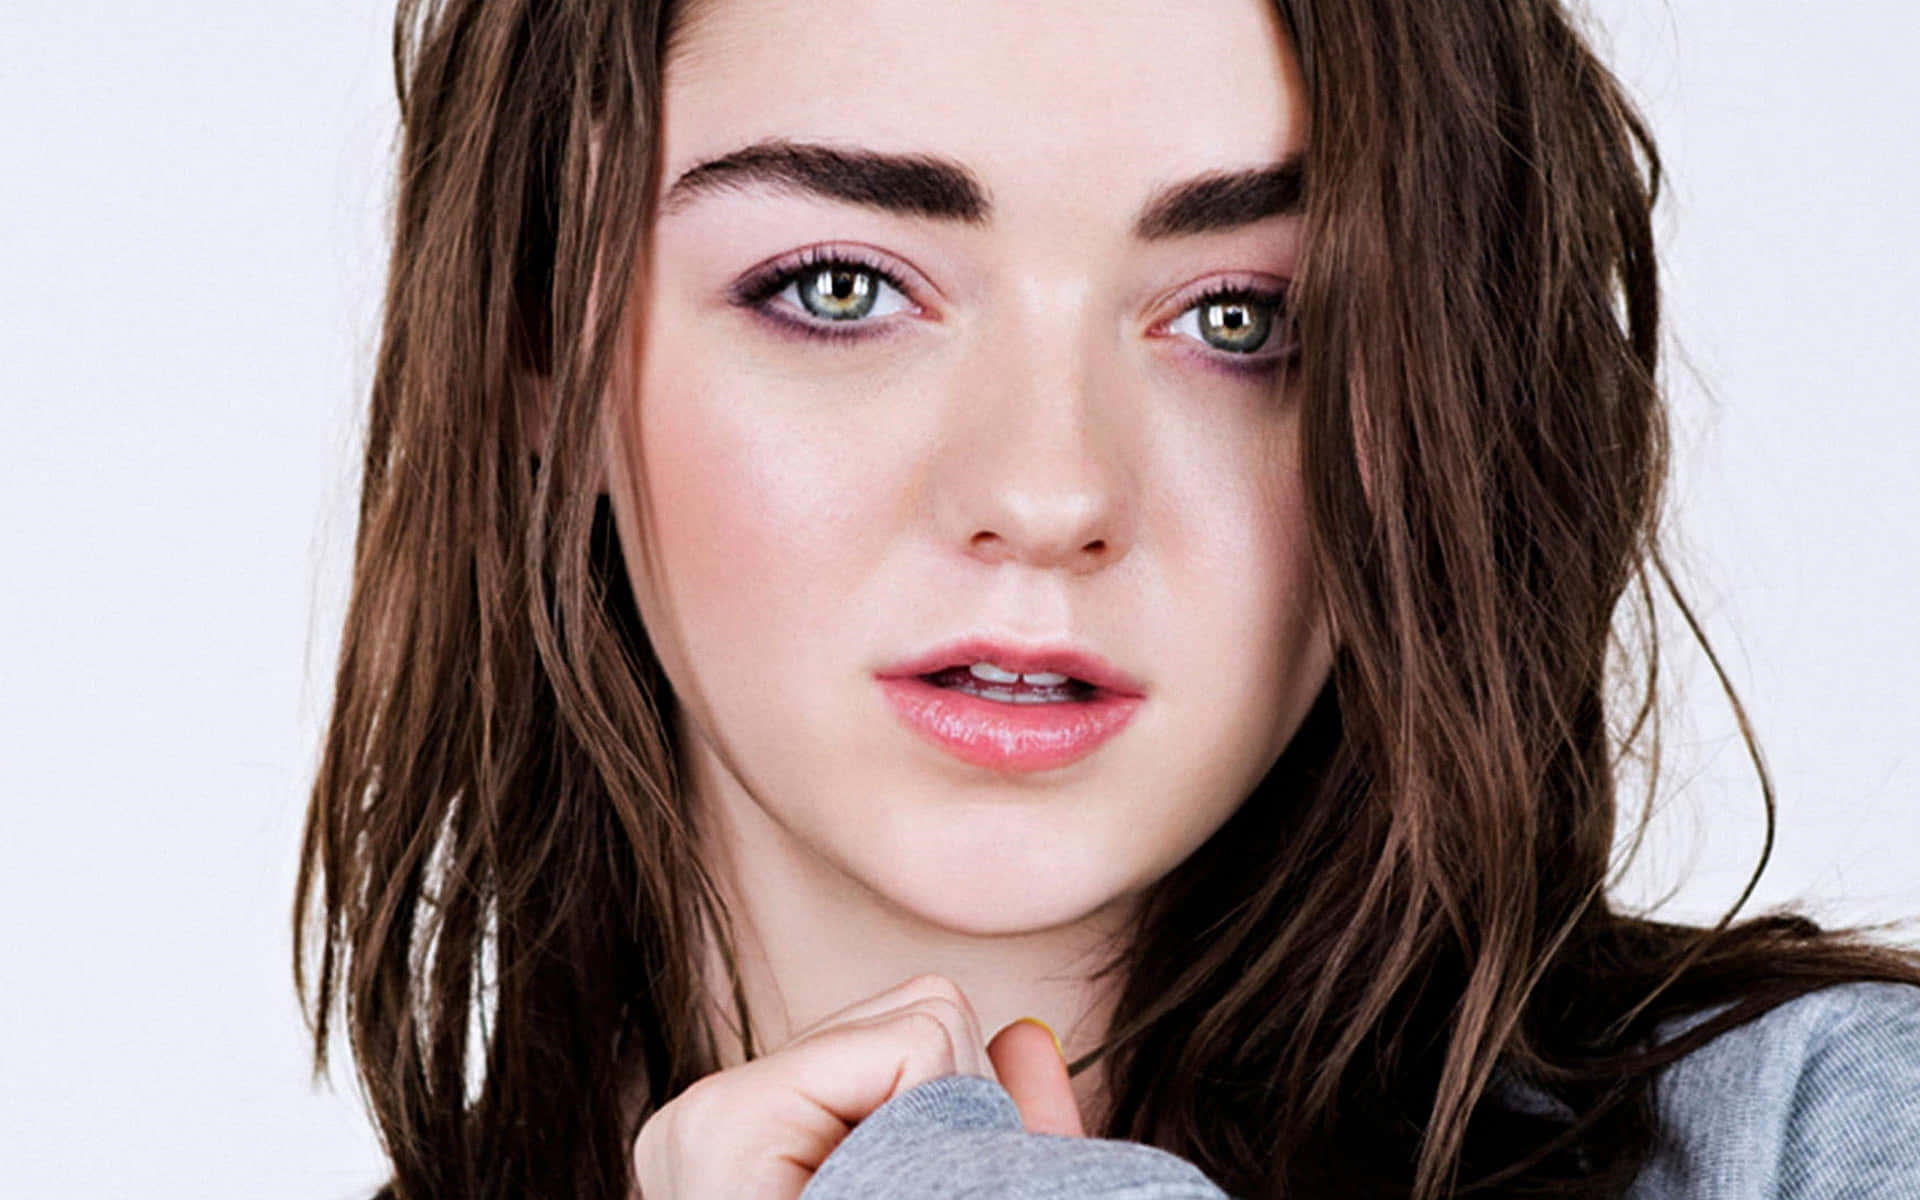 Actress Maisie Williams At An Event Wallpaper